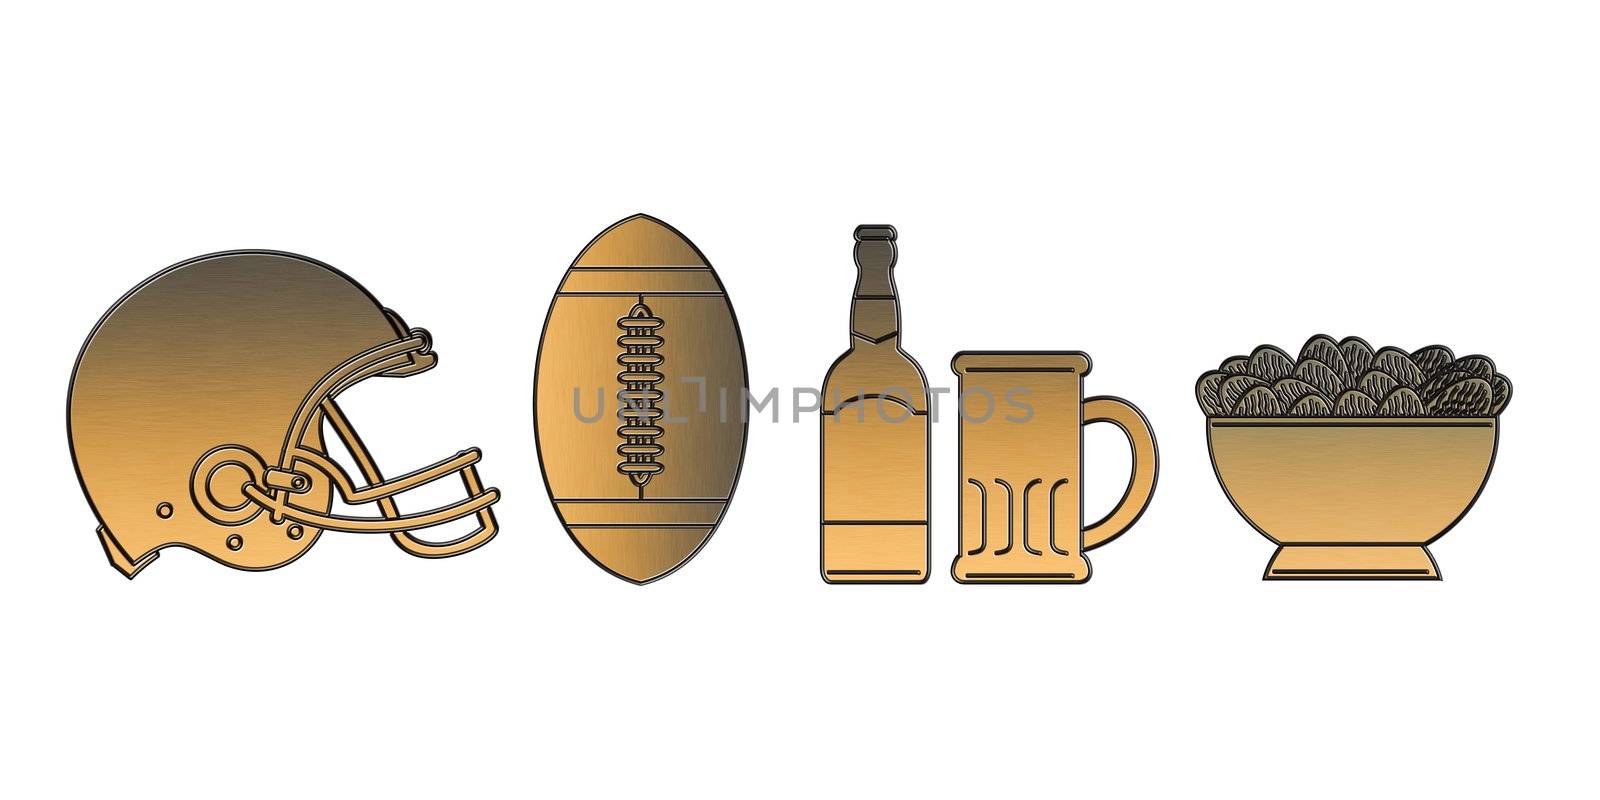 illustration of a golden american football helmet.ball,beer bottle,glass mug and potato chips bowl done in metallic gold style on isolated white background.